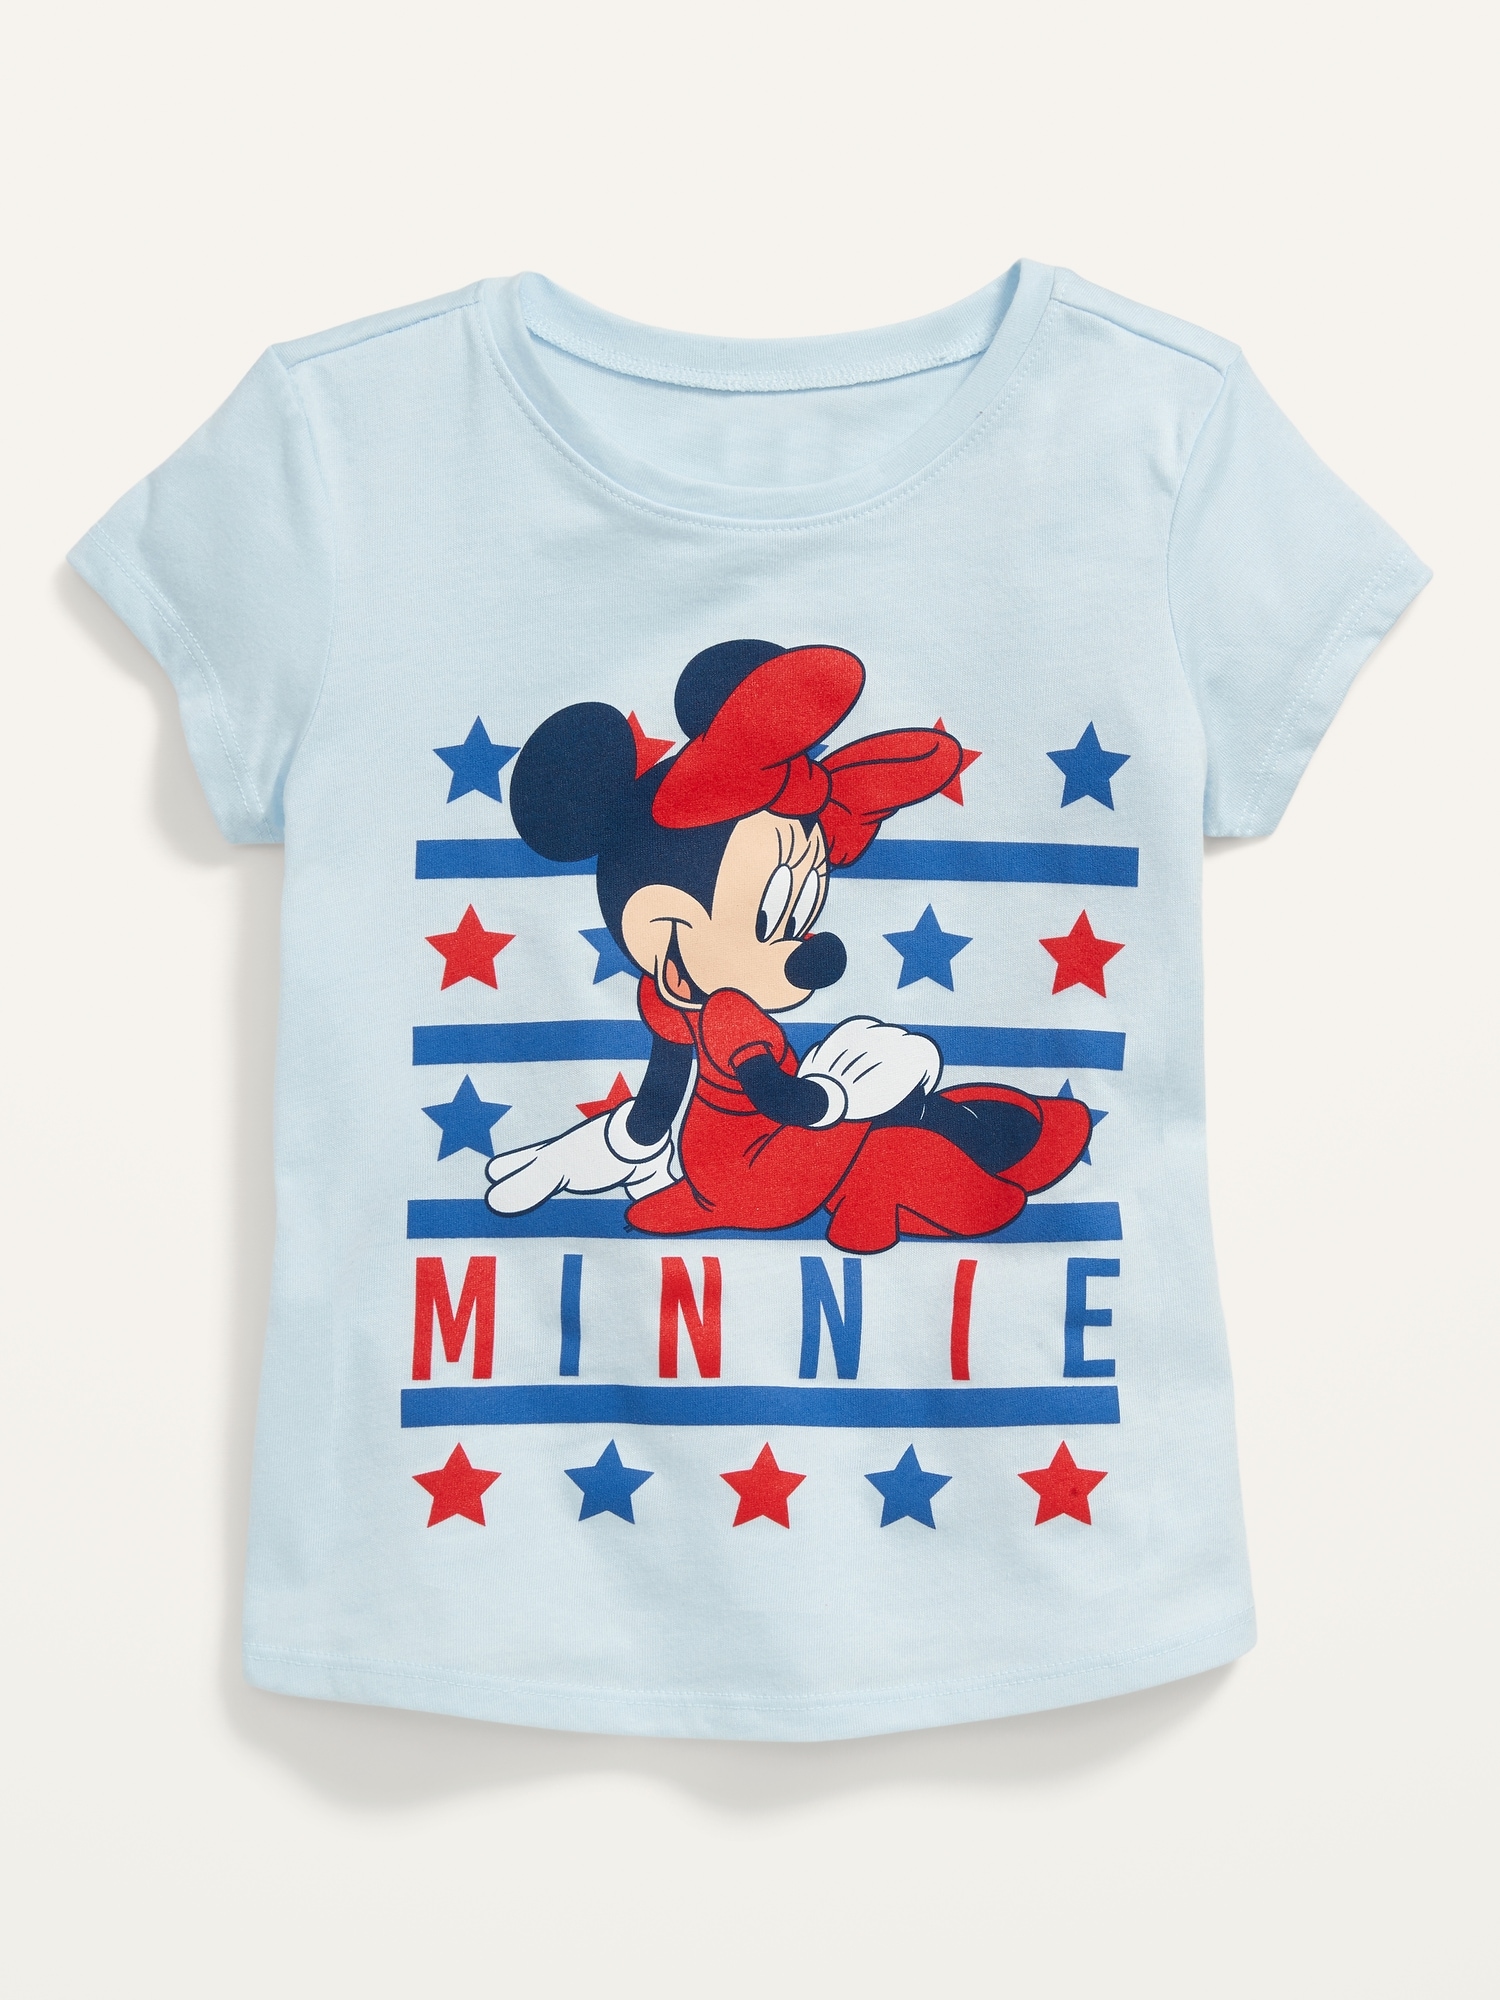 Disney© Minnie Mouse Americana Tee for Toddler Girls